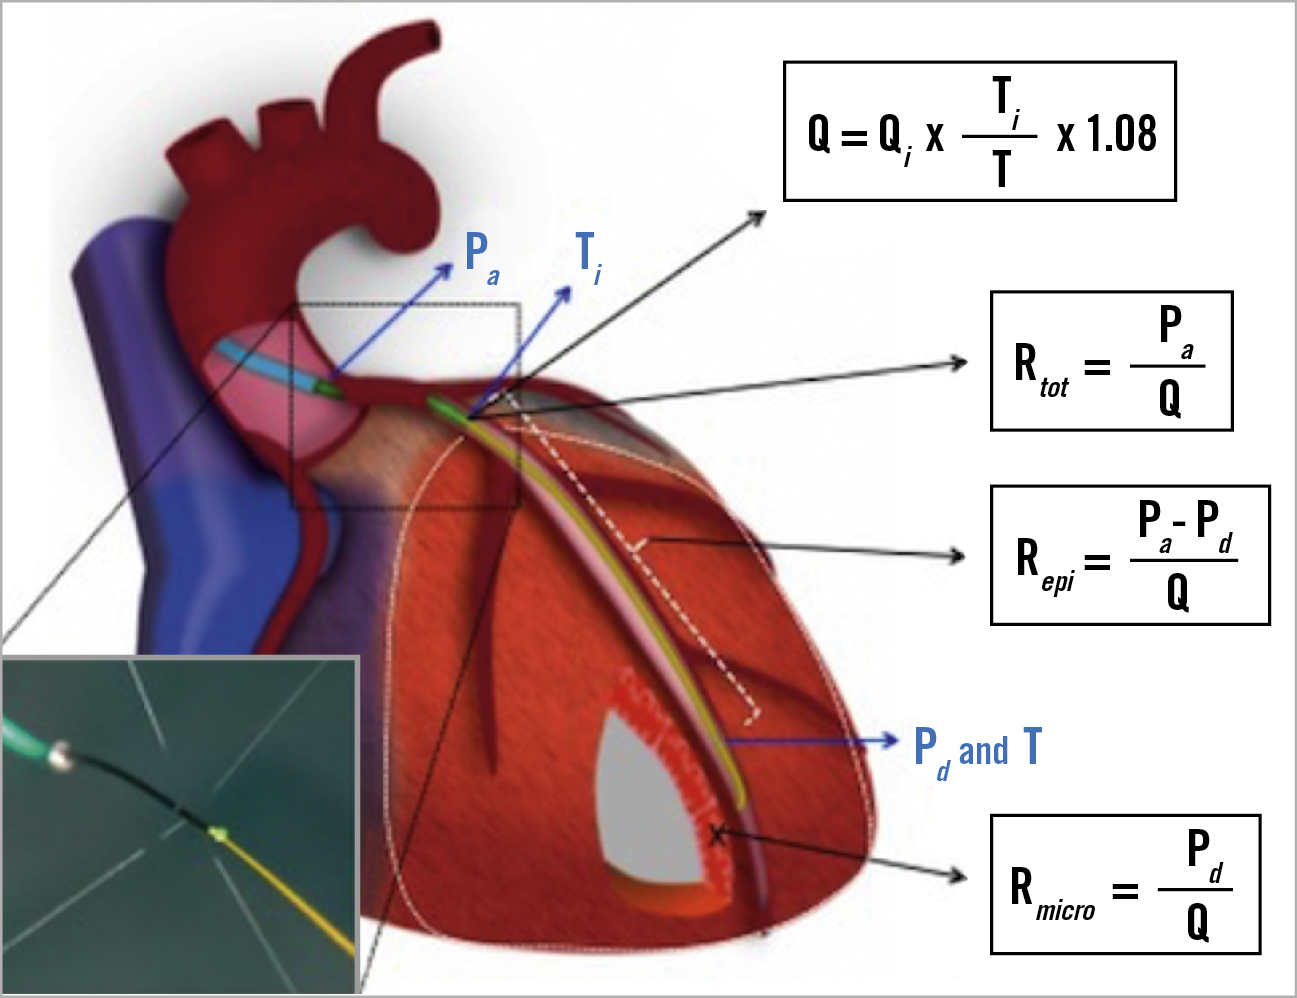 Figure 2. Comprehensive physiological framework of the entire coronary circulation. In the lower left corner, the infusion of saline through the dedicated catheter is shown.